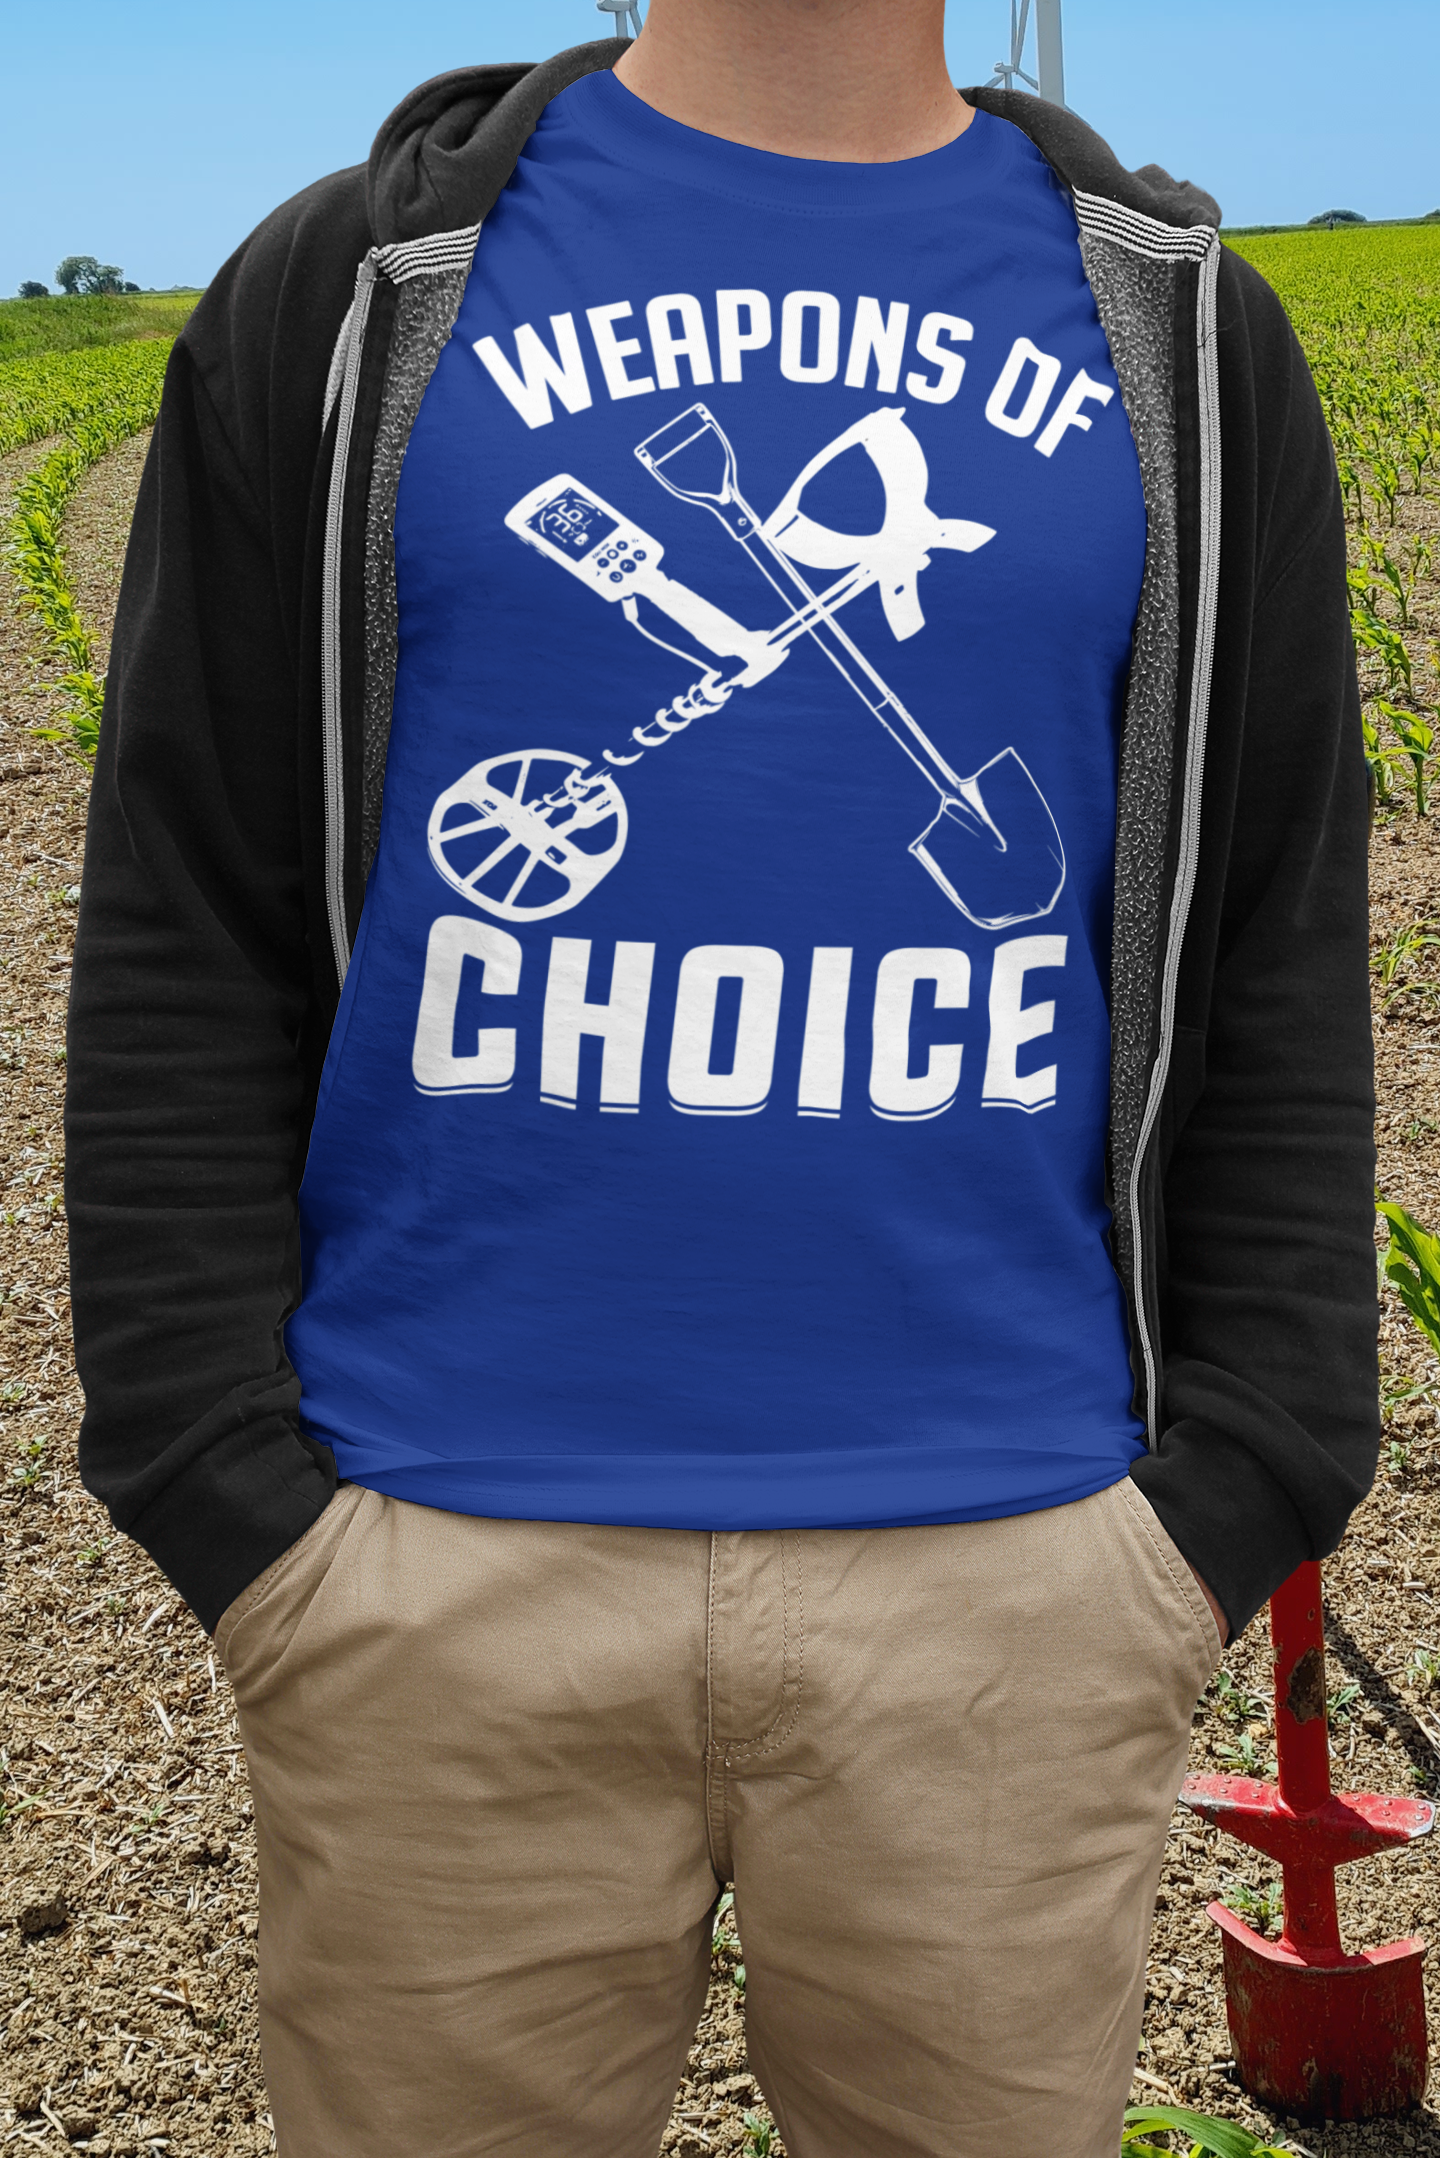 NOX - Weapons of choice T-shirt